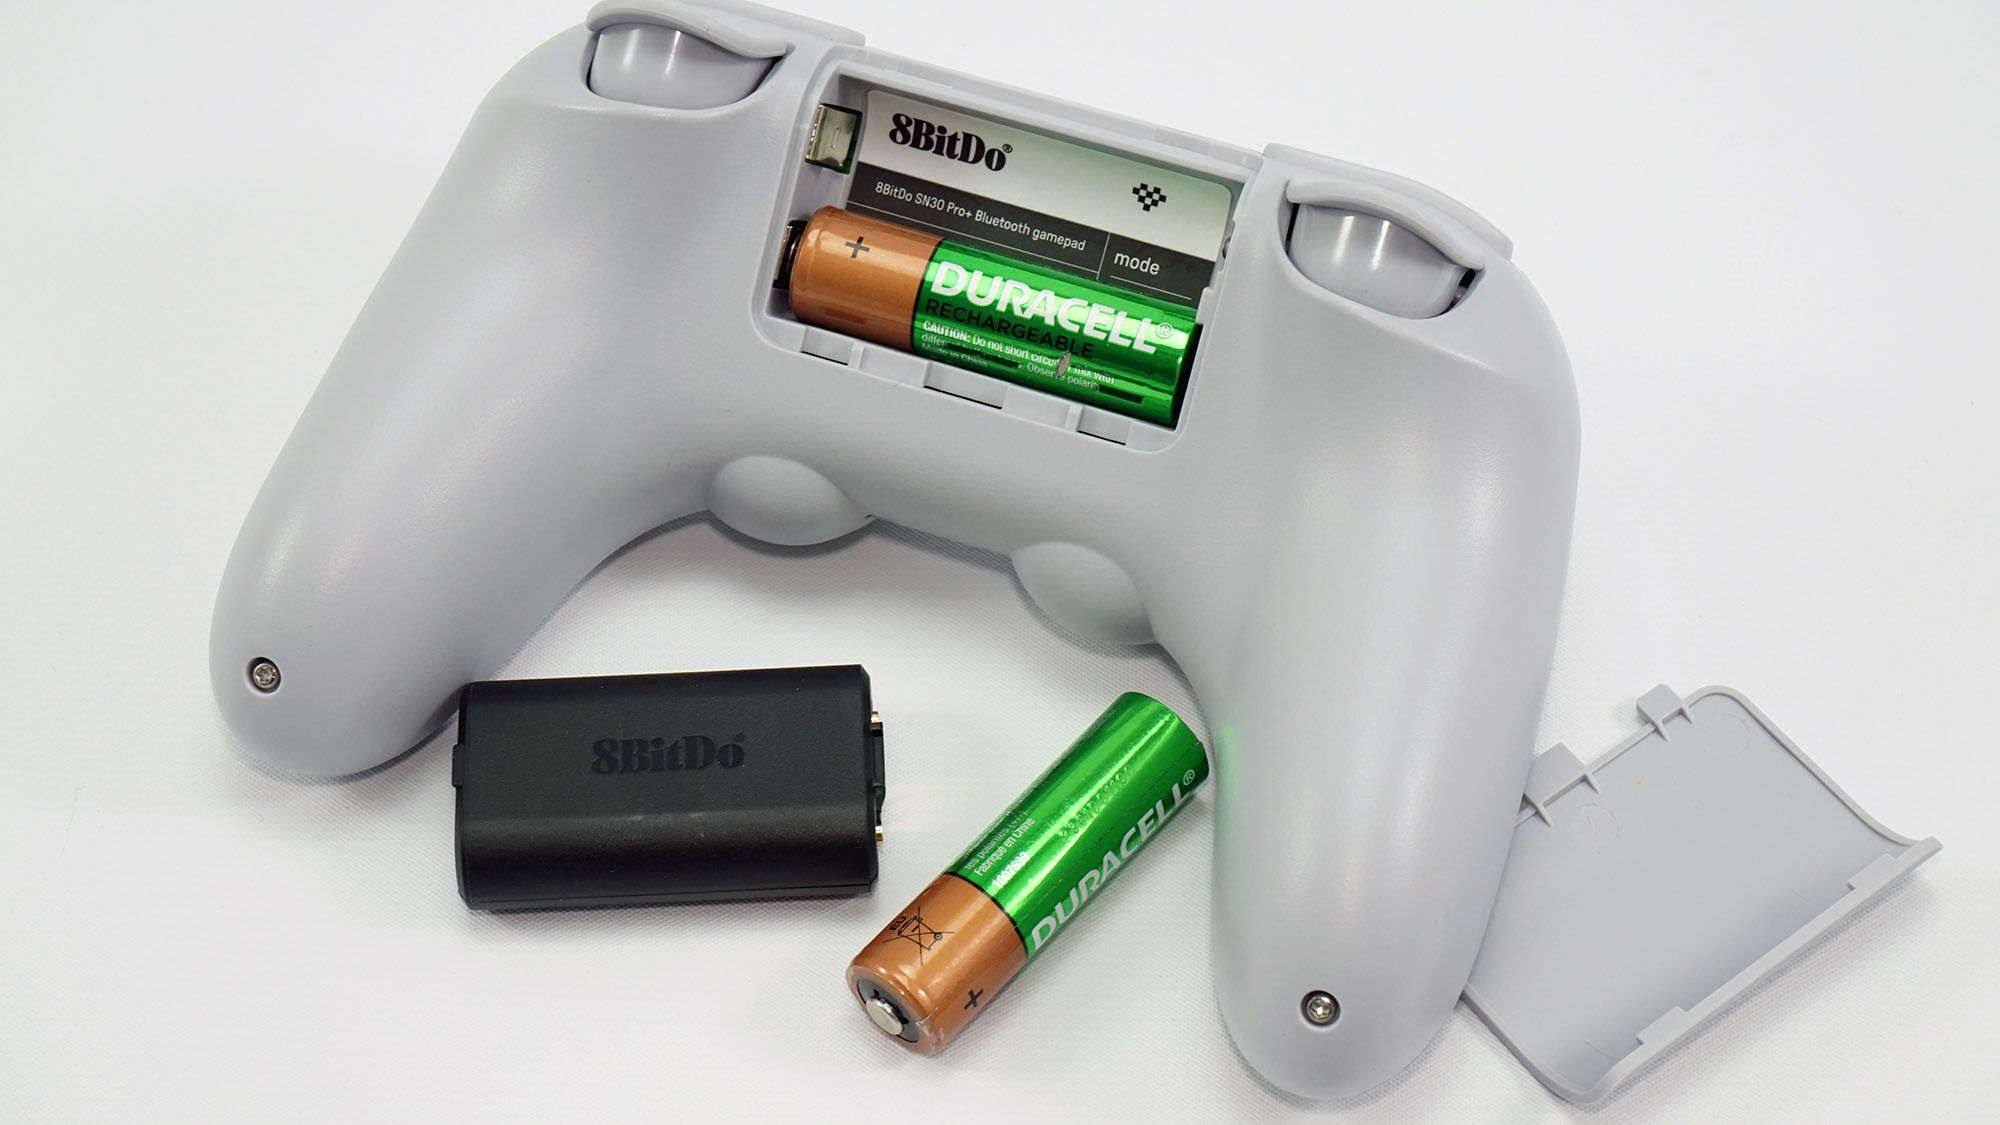 The SN30 Pro+ with rechargeable battery pack and AA batteries.